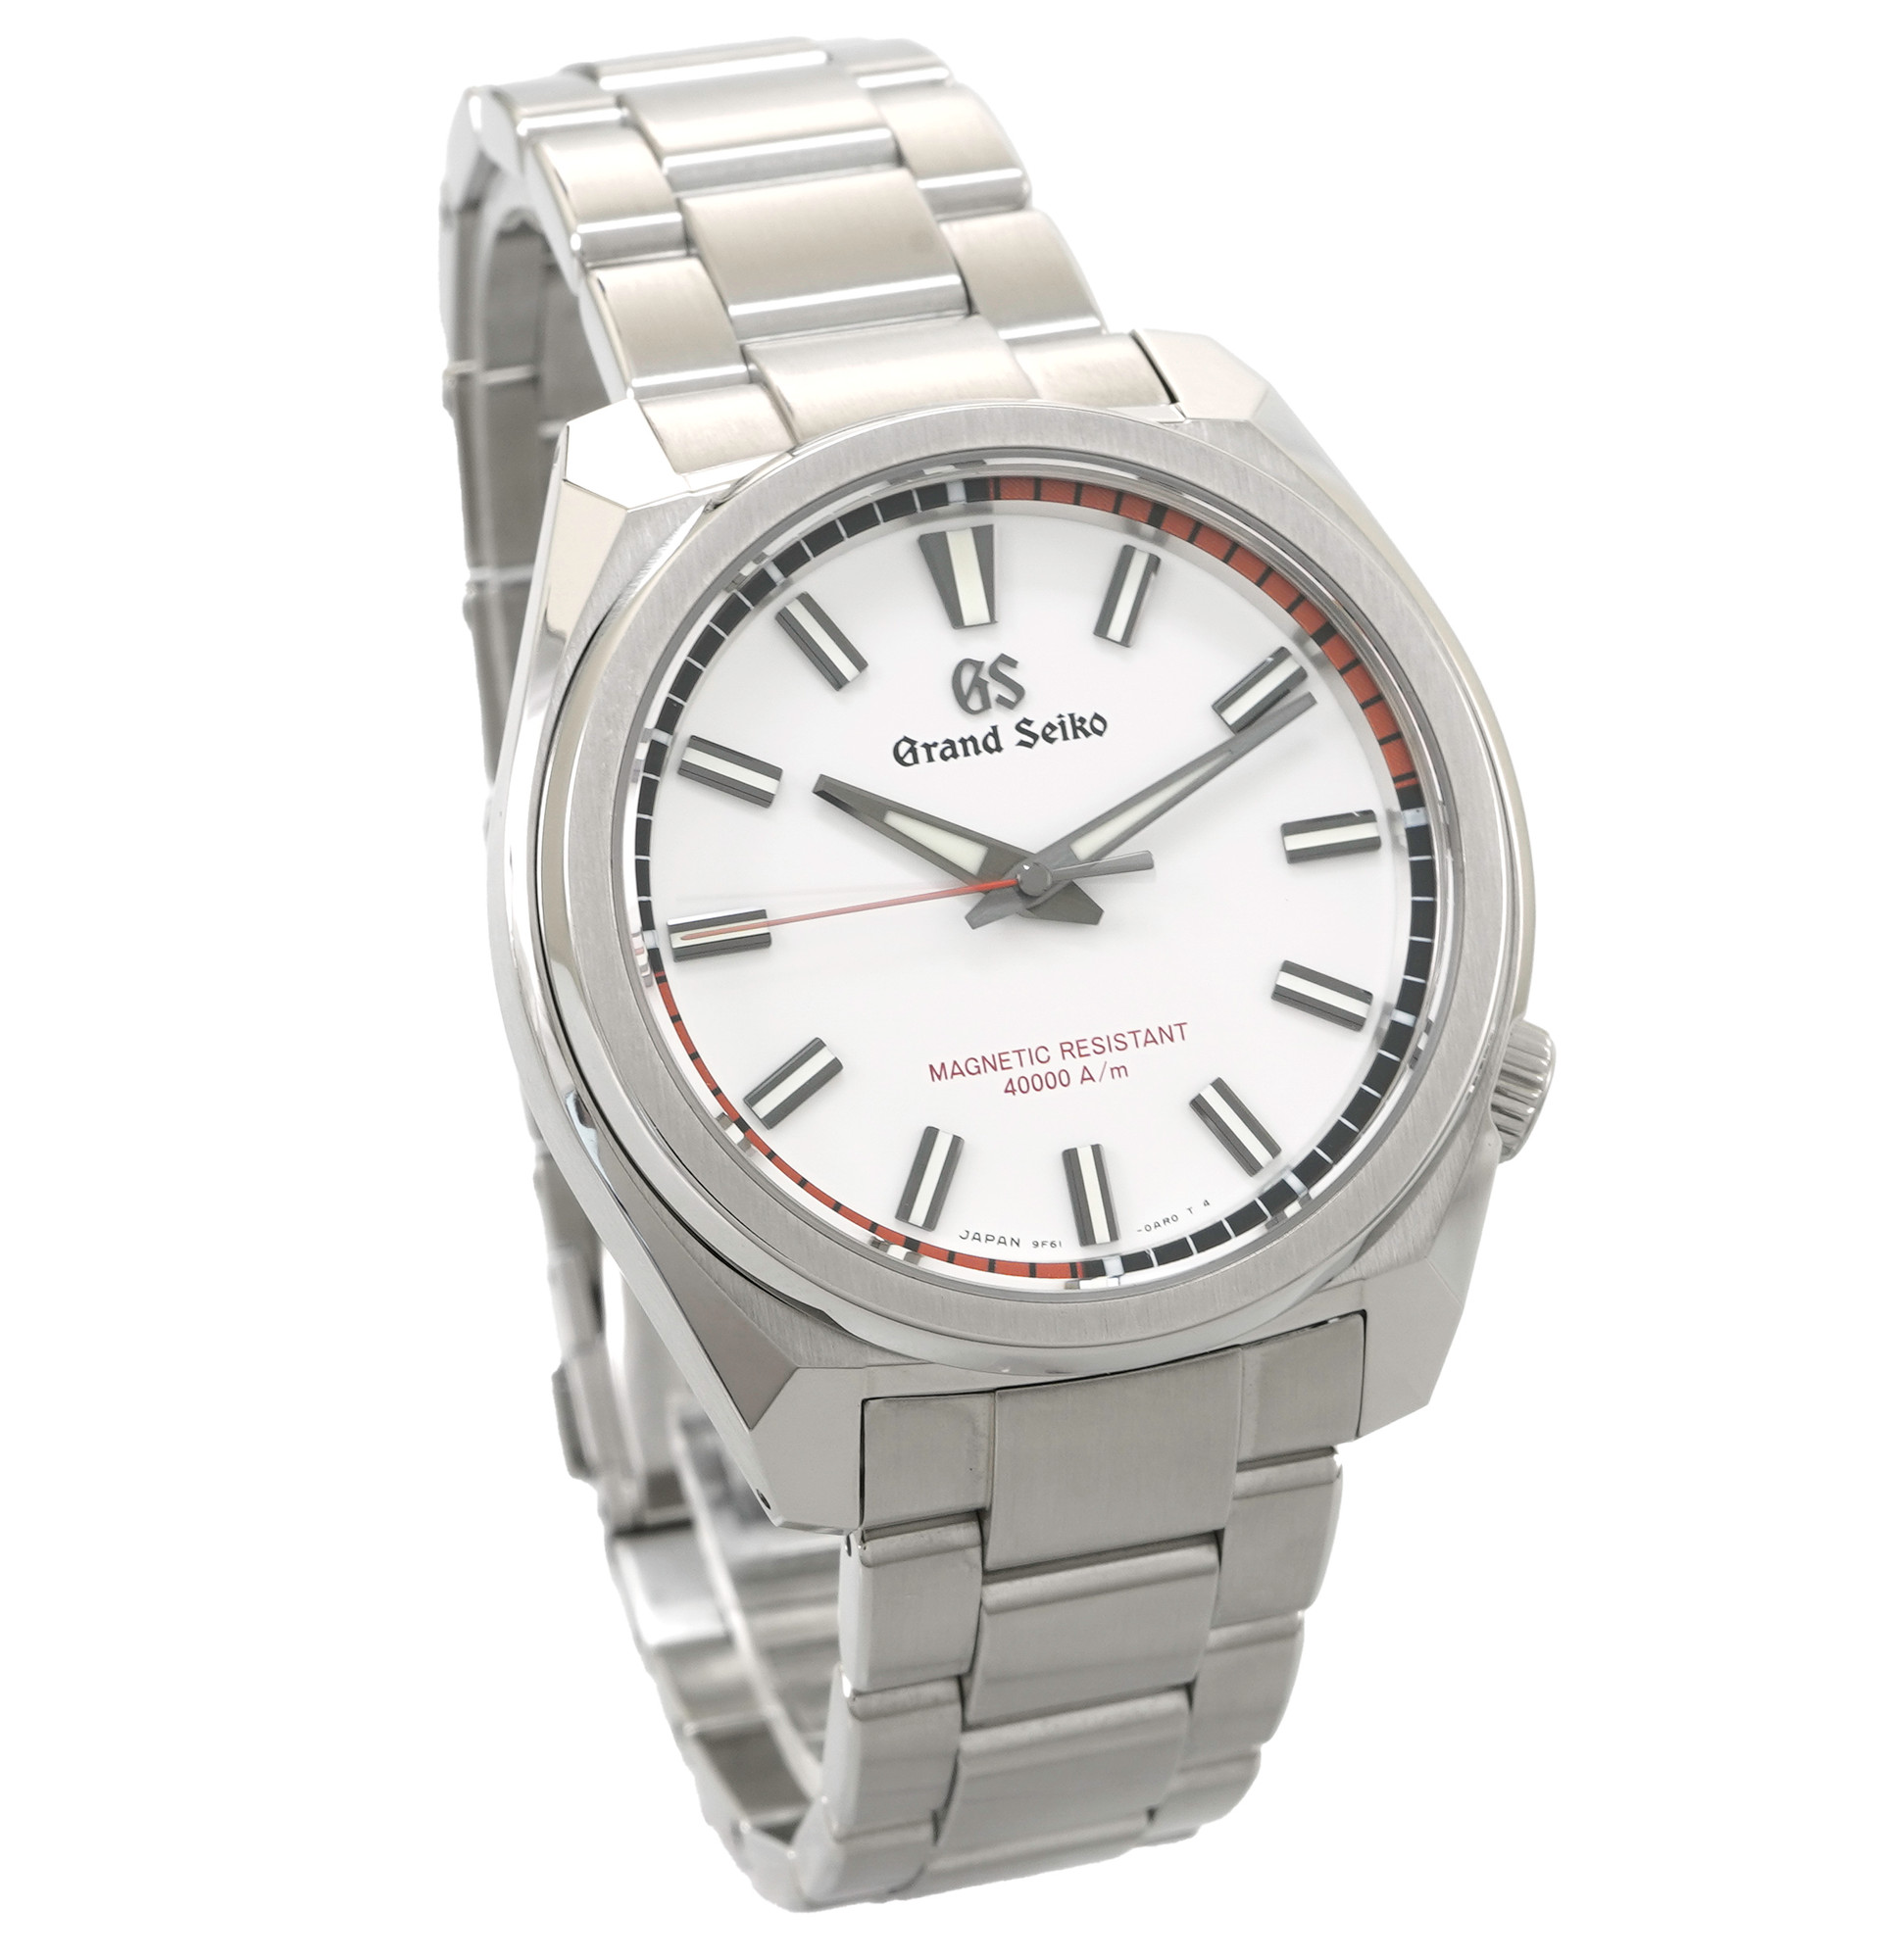 Grand Seiko Sport Collection Magnetic Resistant SBGX341 - Inventory 5436